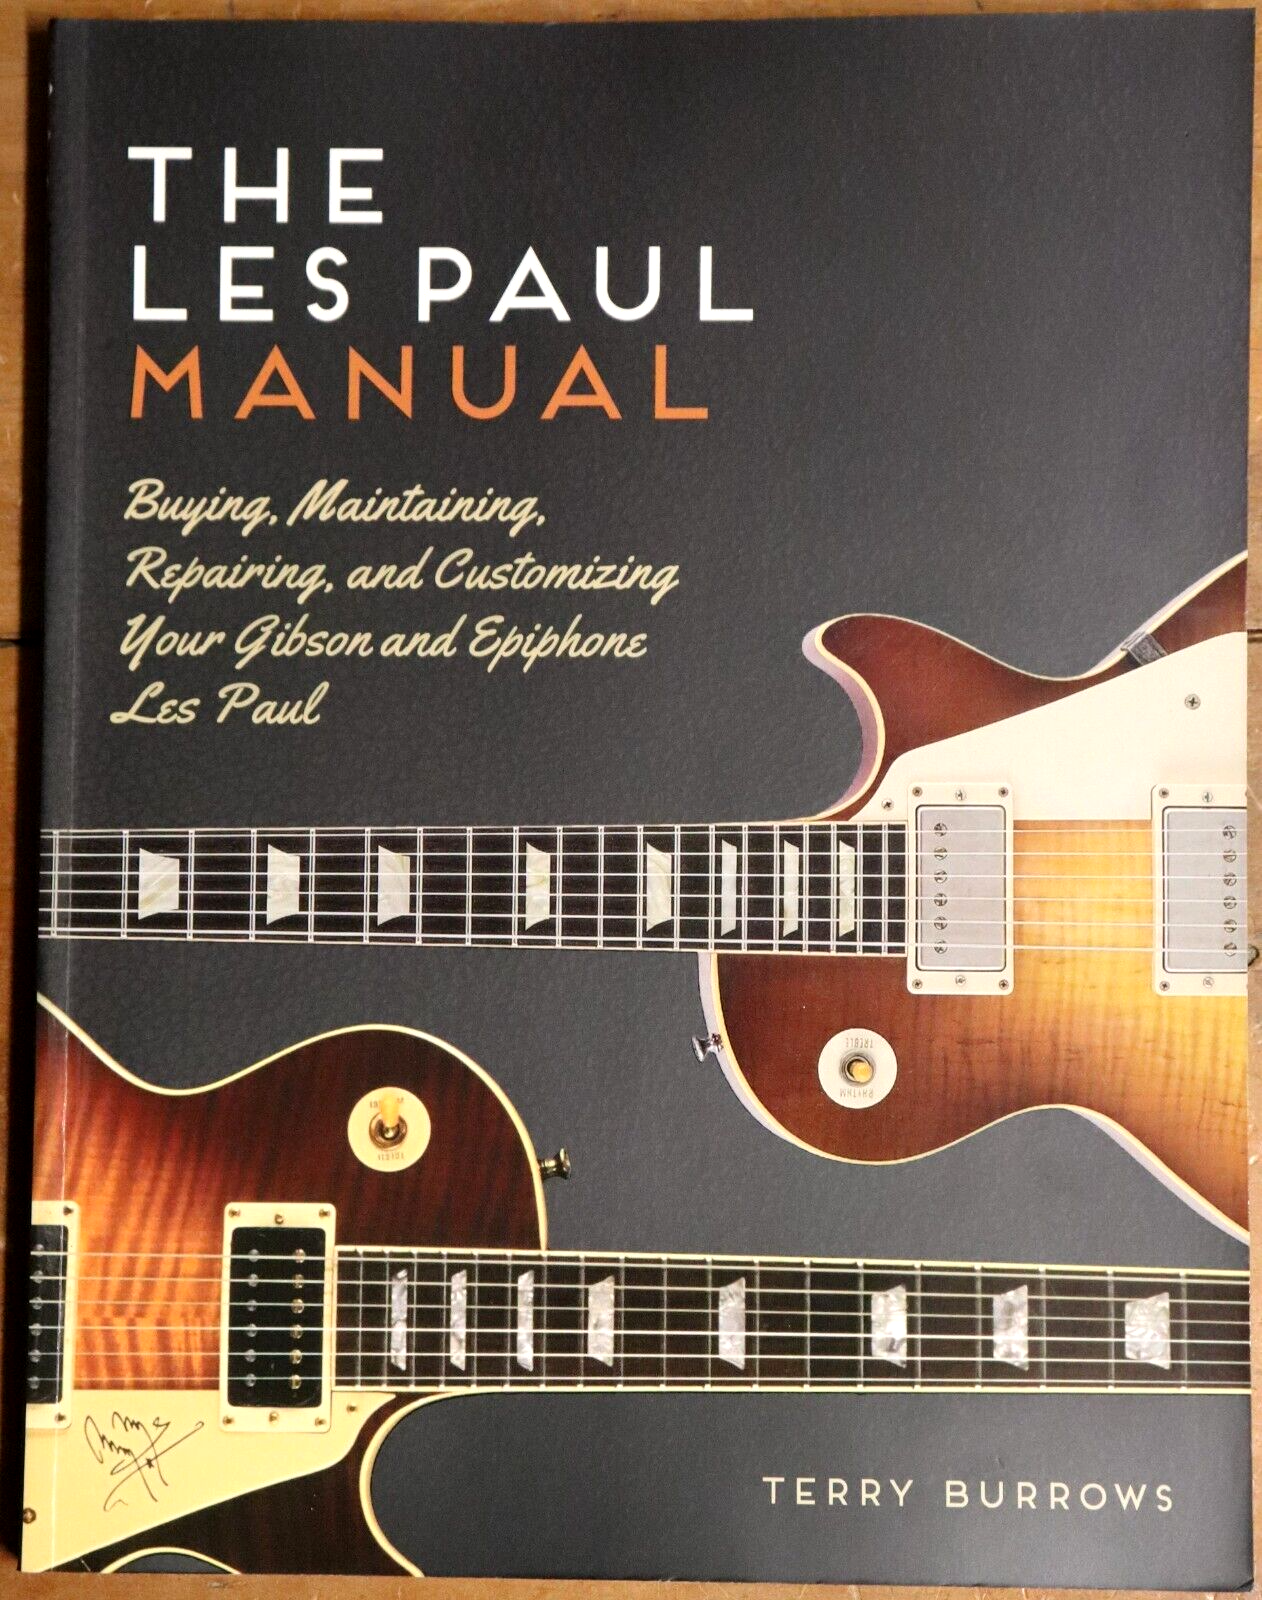 The Les Paul Manual by Terry Burrows - 2015 - 1st Edition Gibson Guitar Book